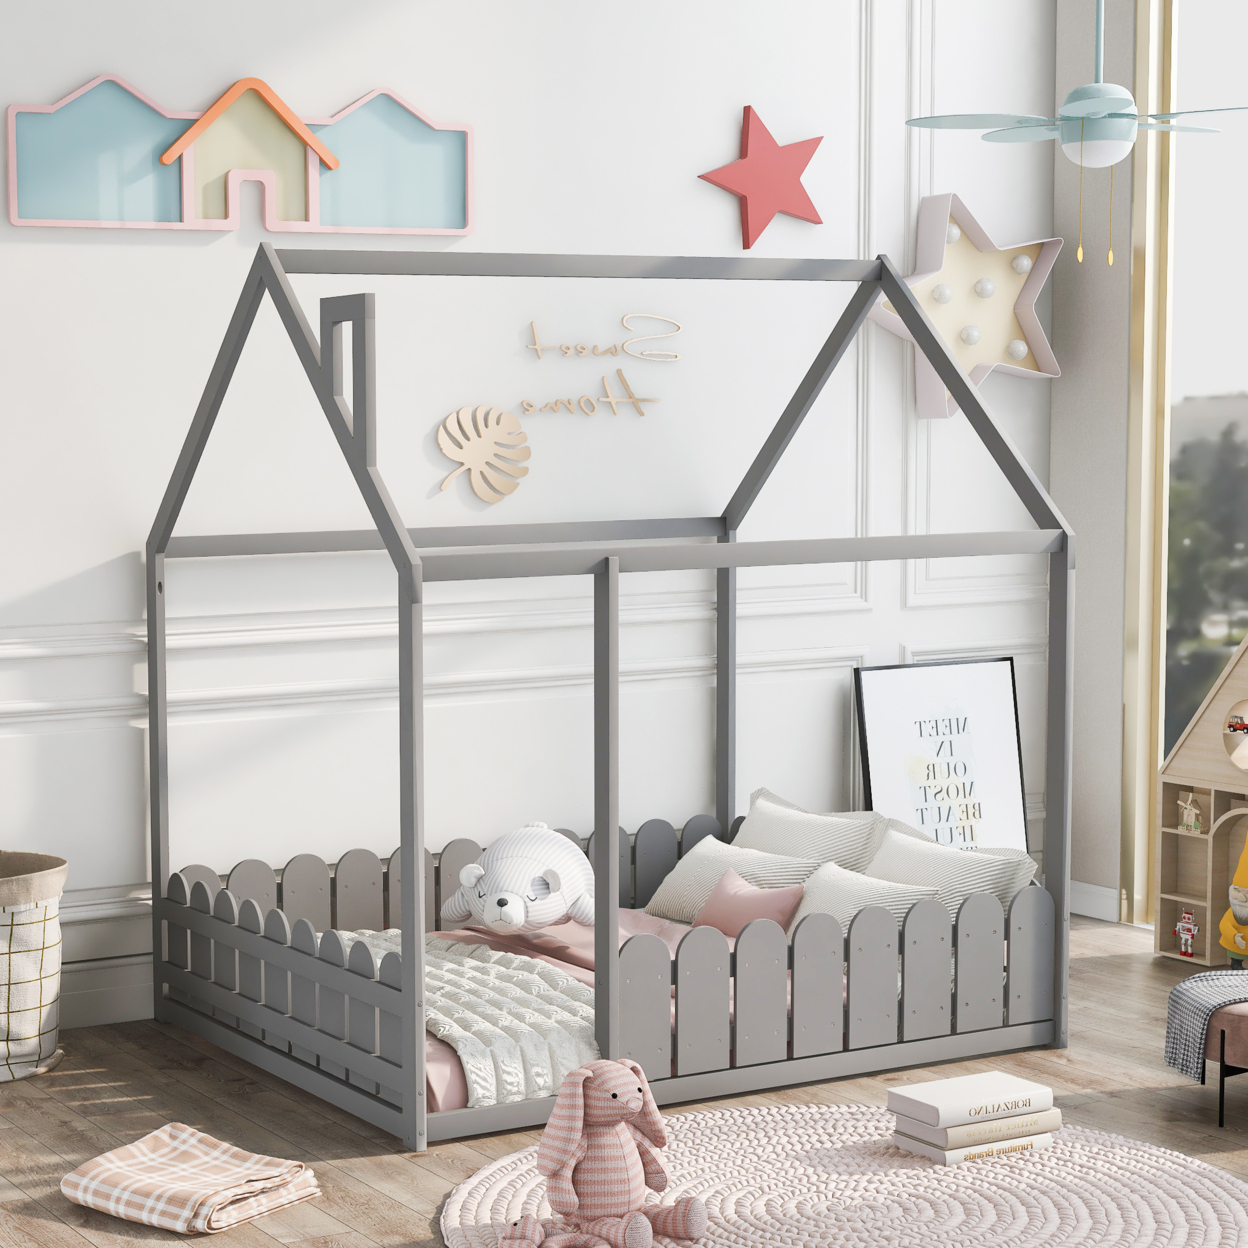 ï¿½ï¿½Slats are not included) Full Size Wood Bed House Bed Frame with Fence, for Kids, Teens, Girls, Boys (Gray )